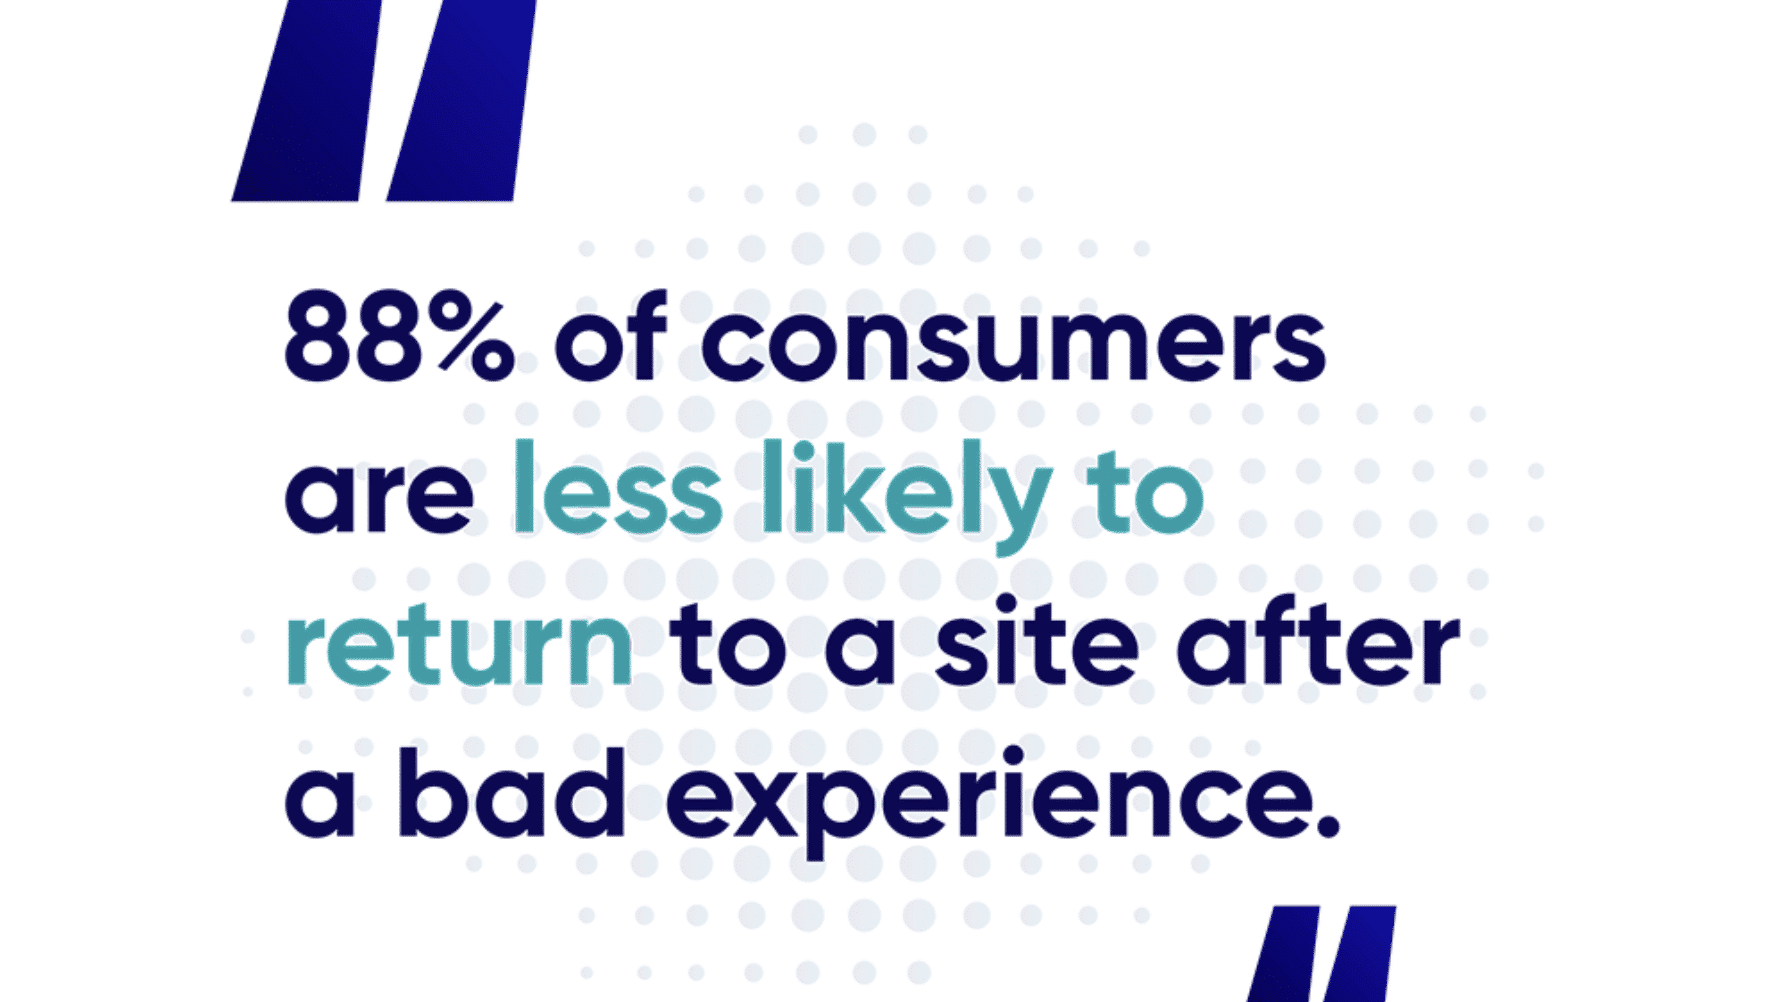 graphic shows that 88% of consumers are less likely to return to a site after a bad experience